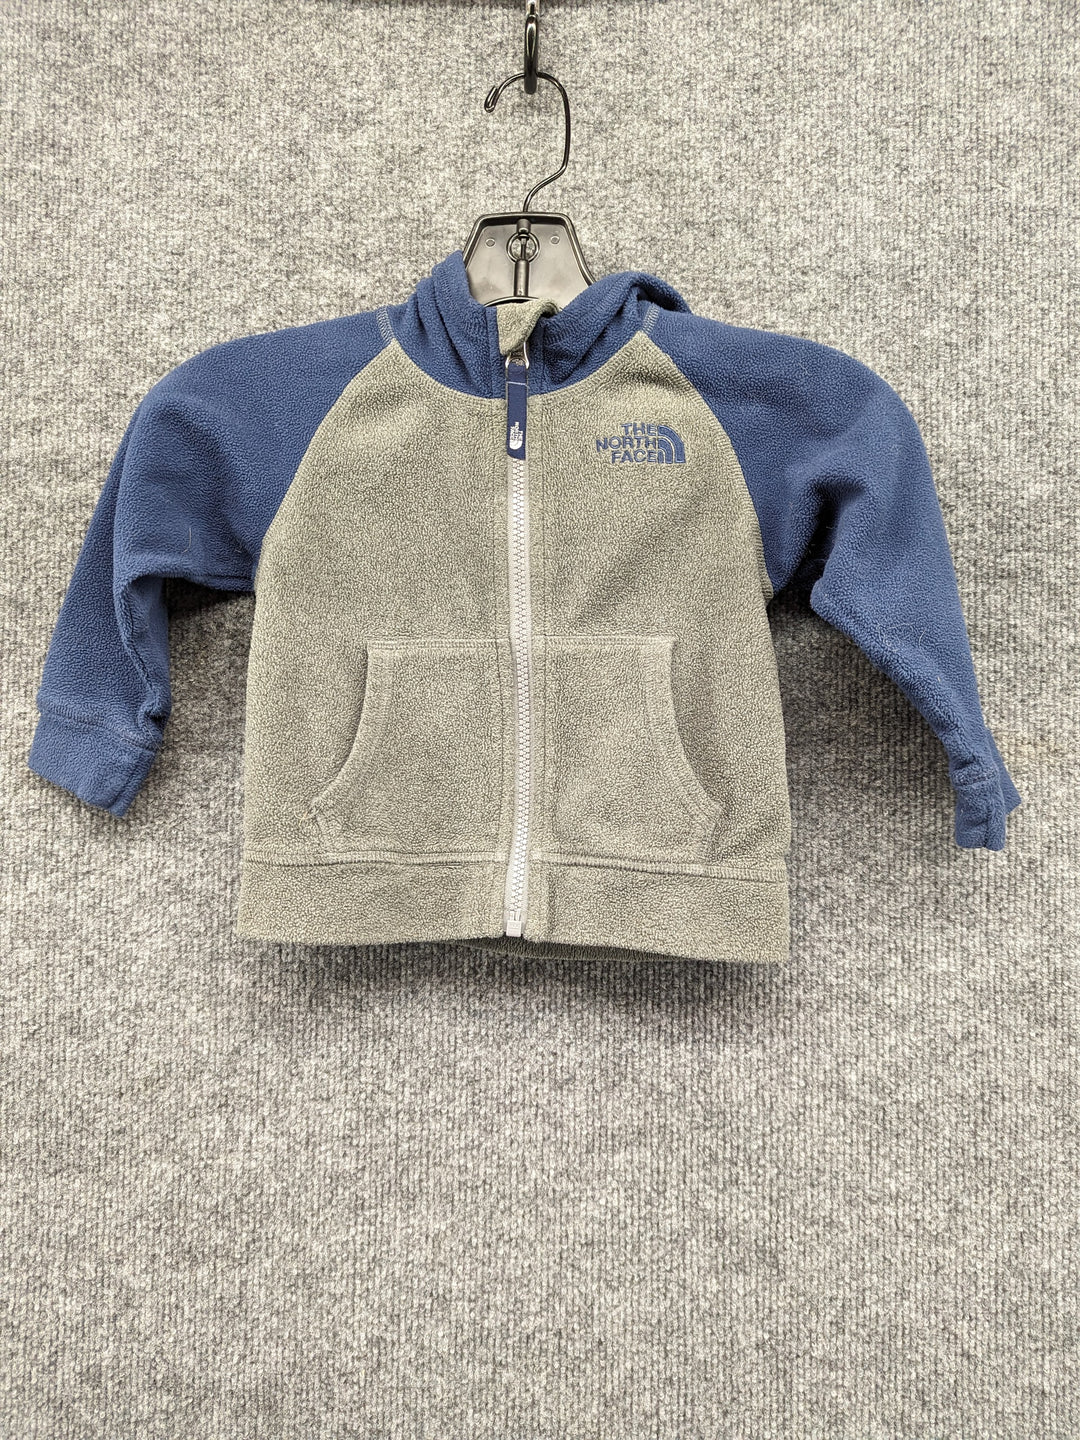 The North Face Toddler Youth Fleece